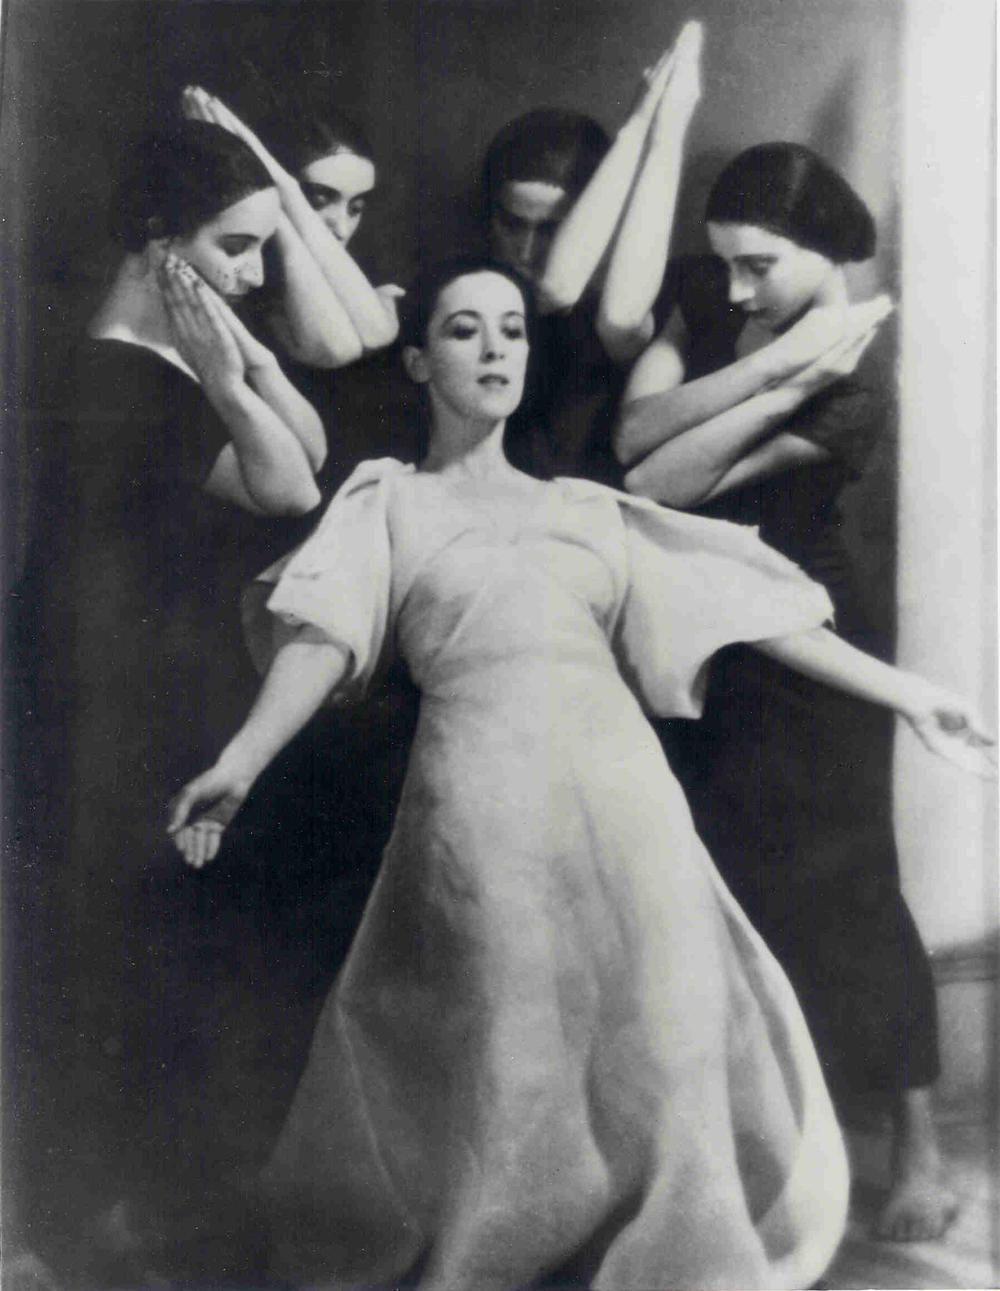 Martha Graham was among the modern dance pioneers who taught at 92NY before founding her own company.